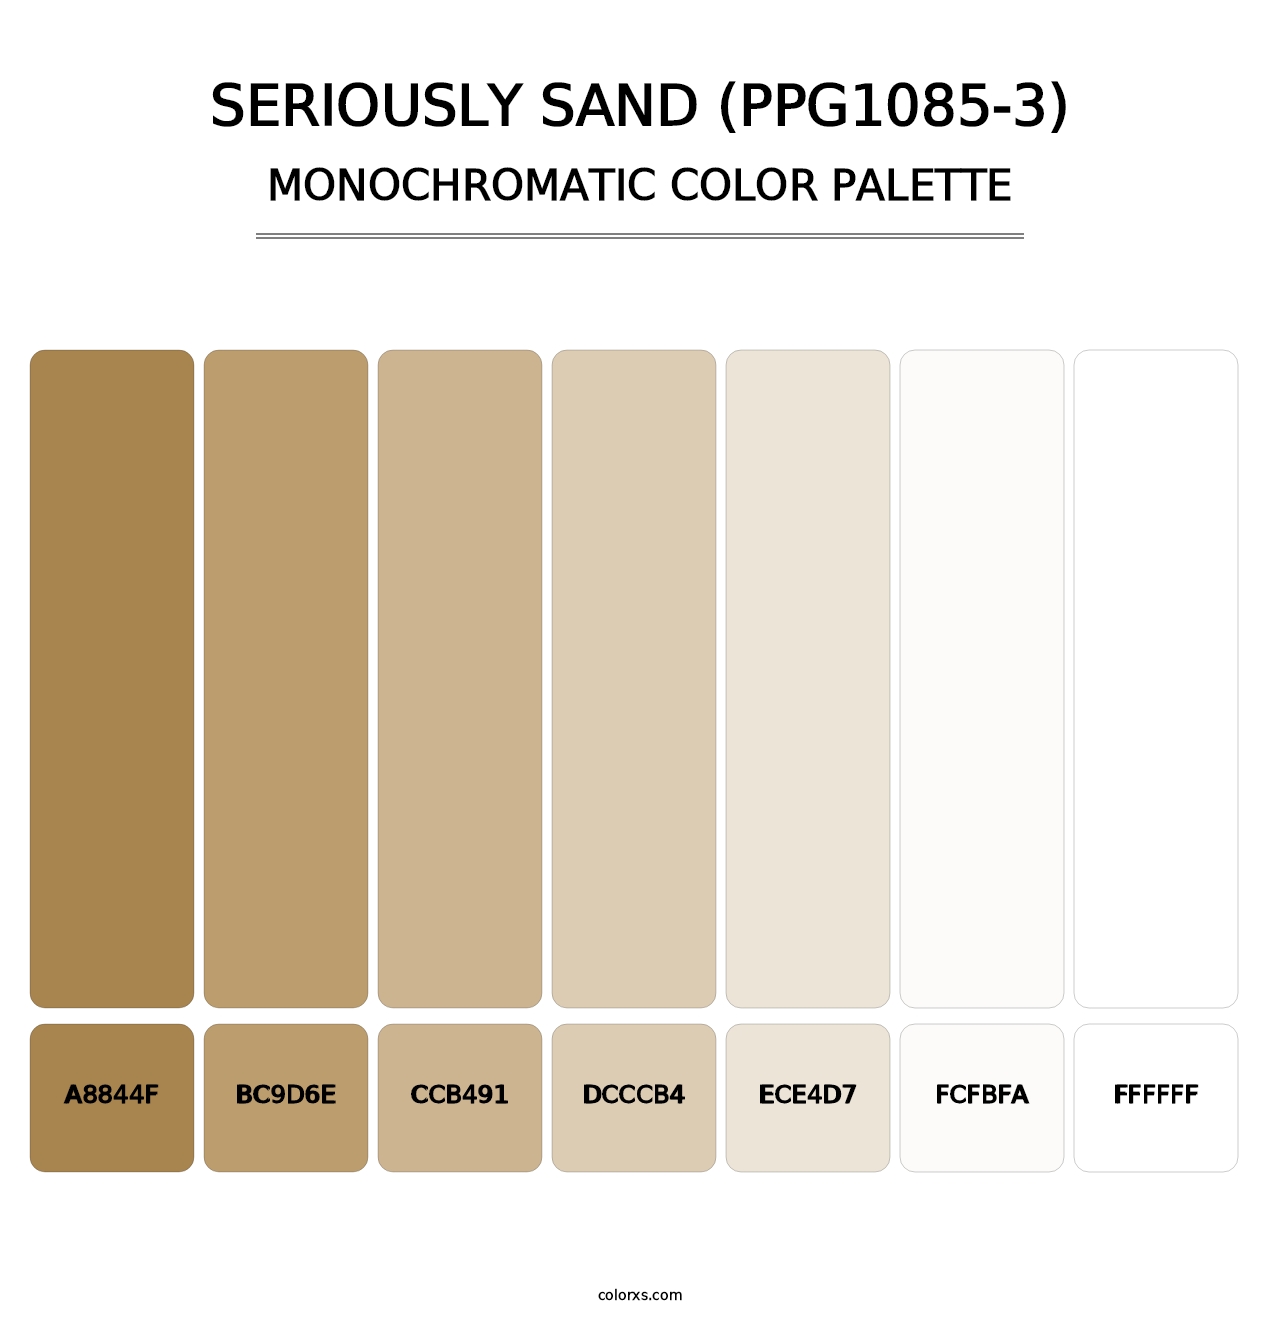 Seriously Sand (PPG1085-3) - Monochromatic Color Palette